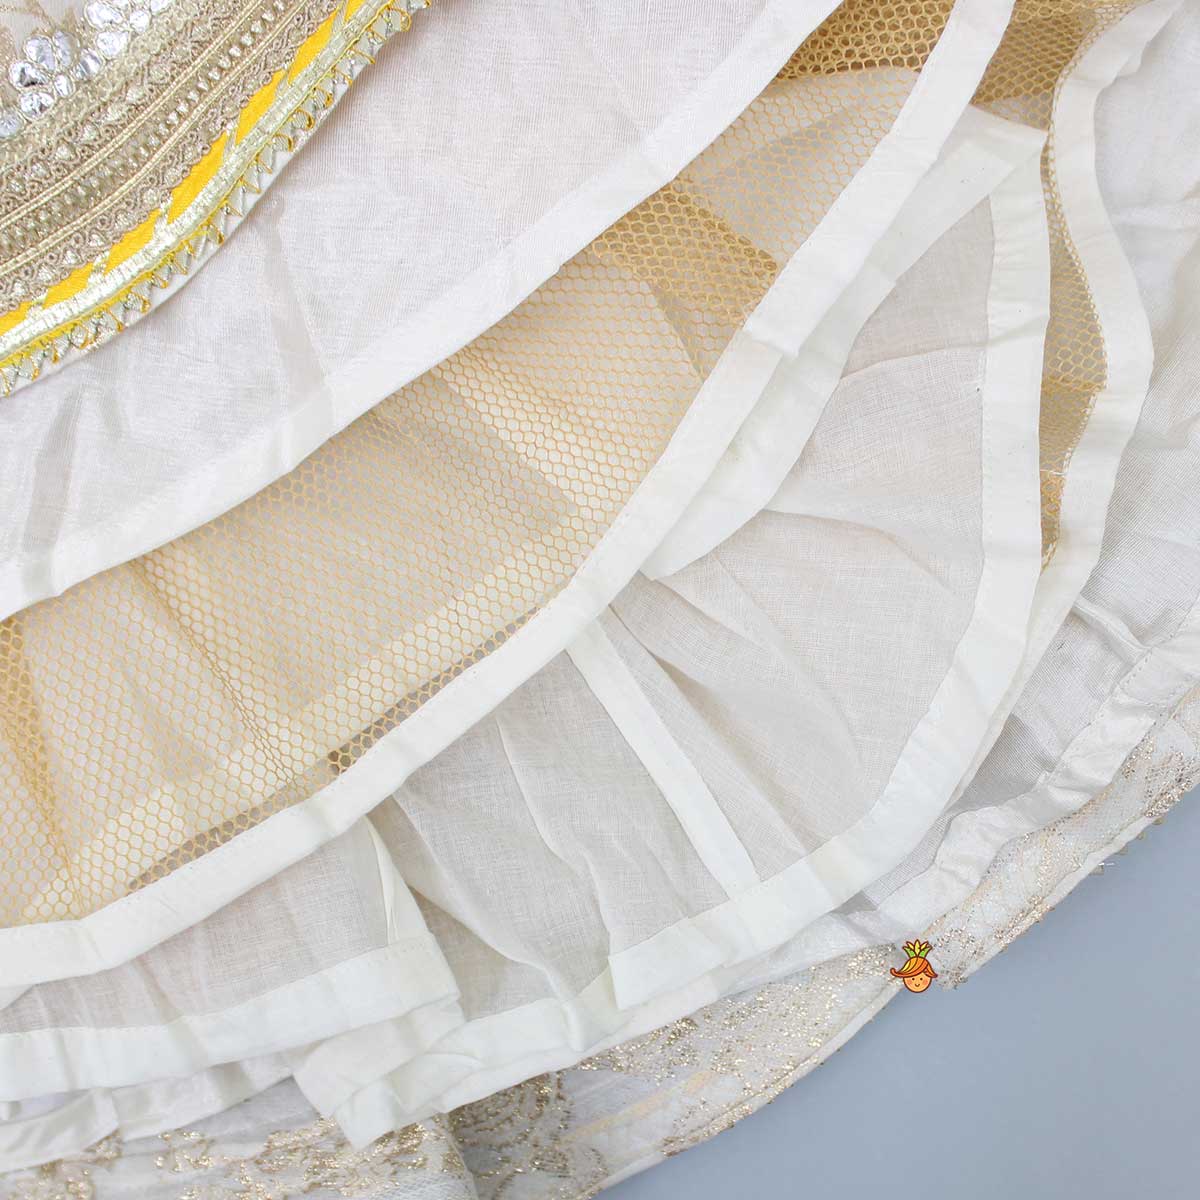 V Neck Chanderi Embroidered Off White Anarkali With Attached Multicolour Printed Dupatta